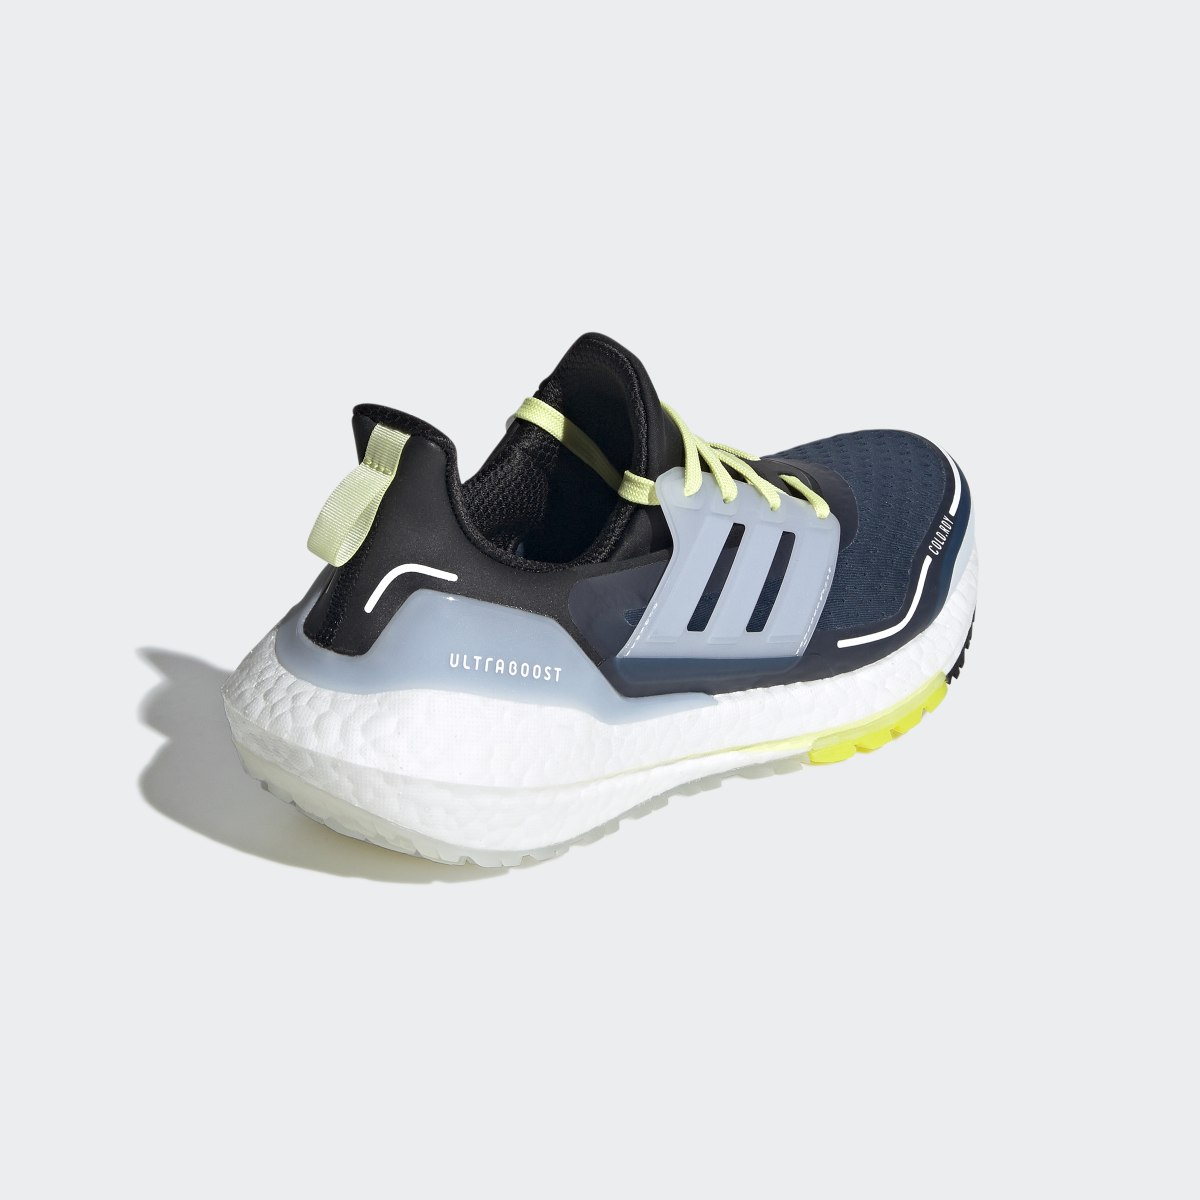 Adidas Ultraboost 21 COLD.RDY Shoes. 7